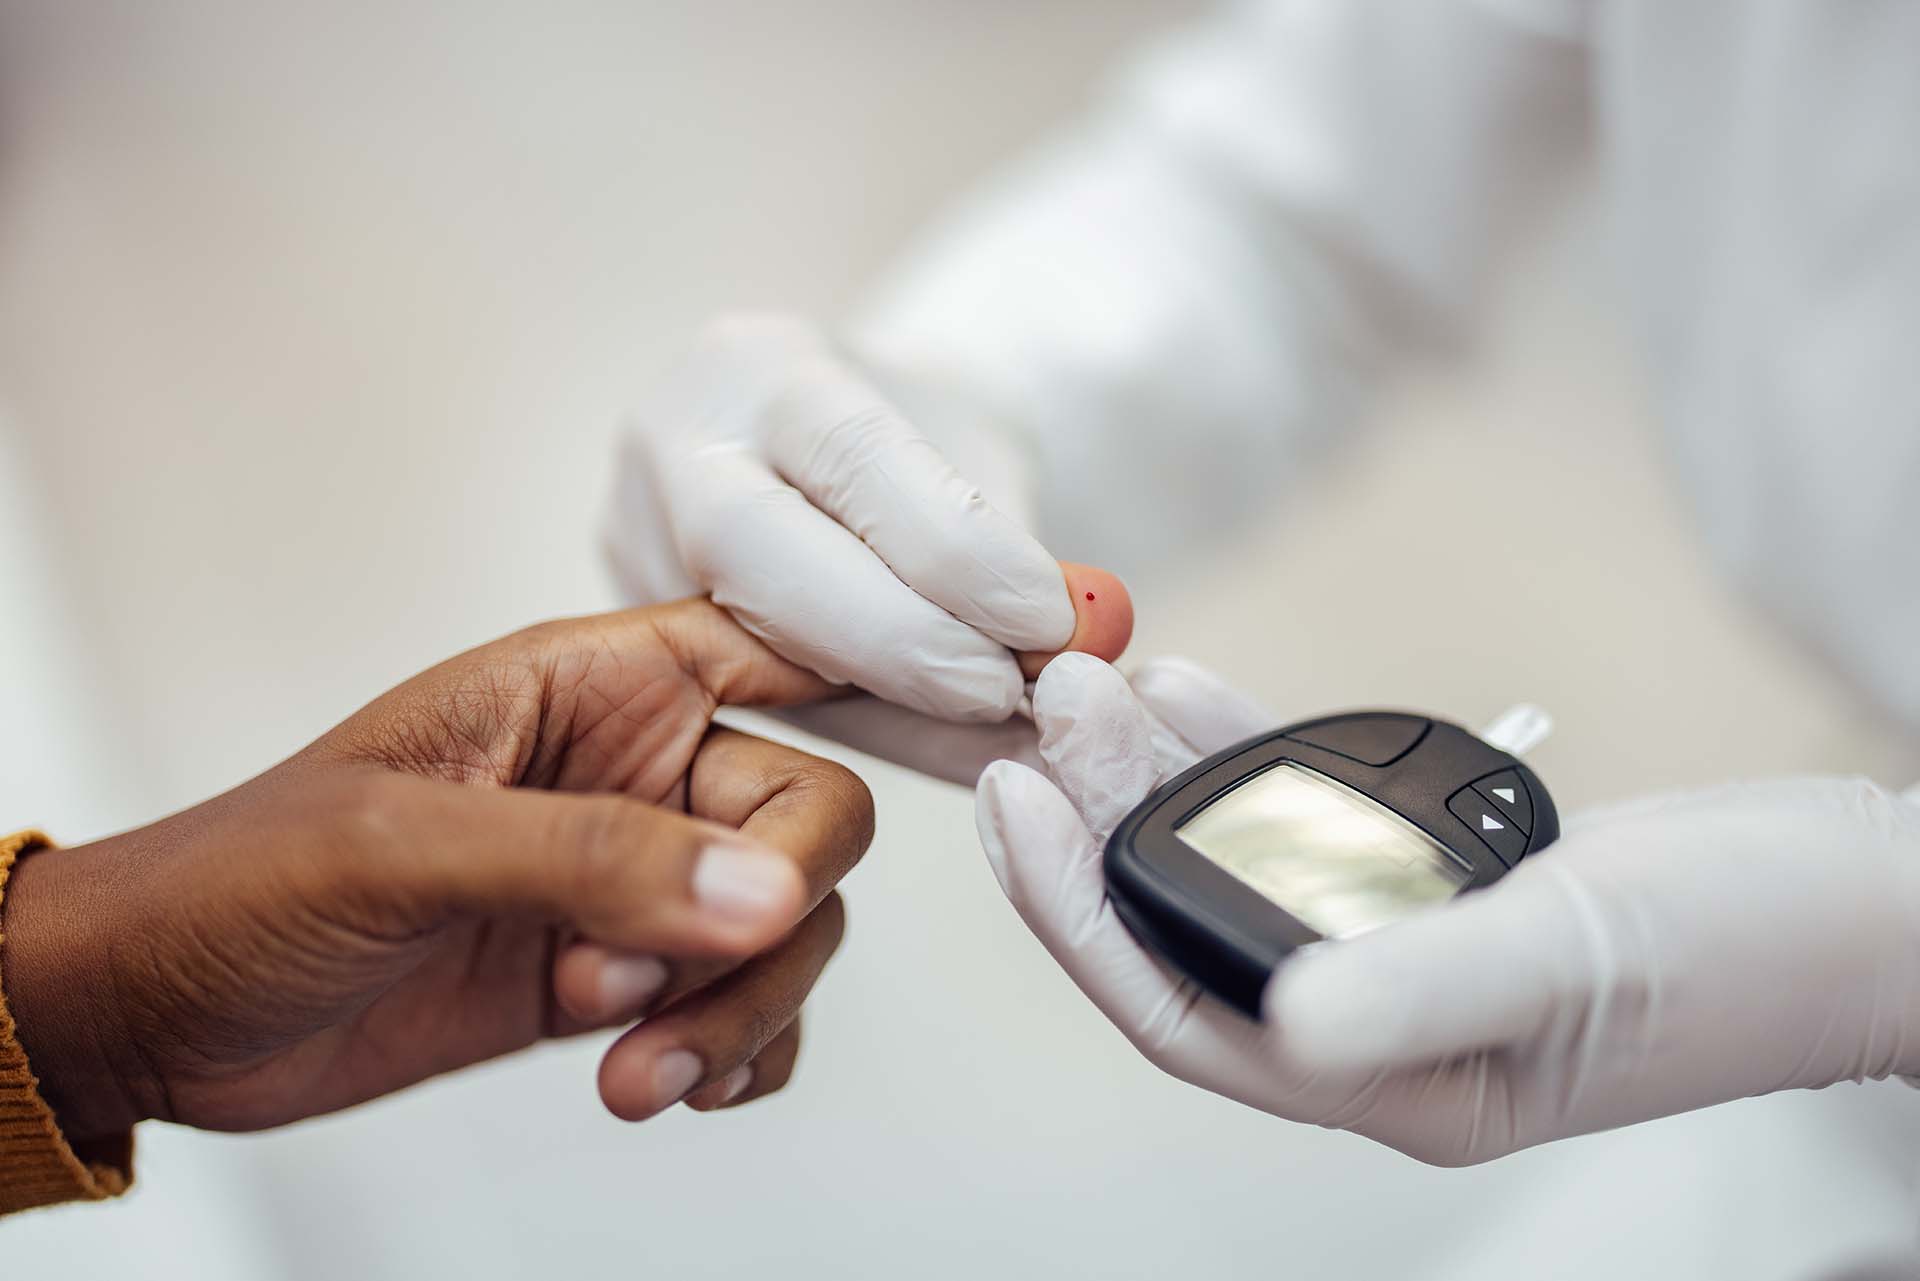 measure blood sugar directly not with smart watches